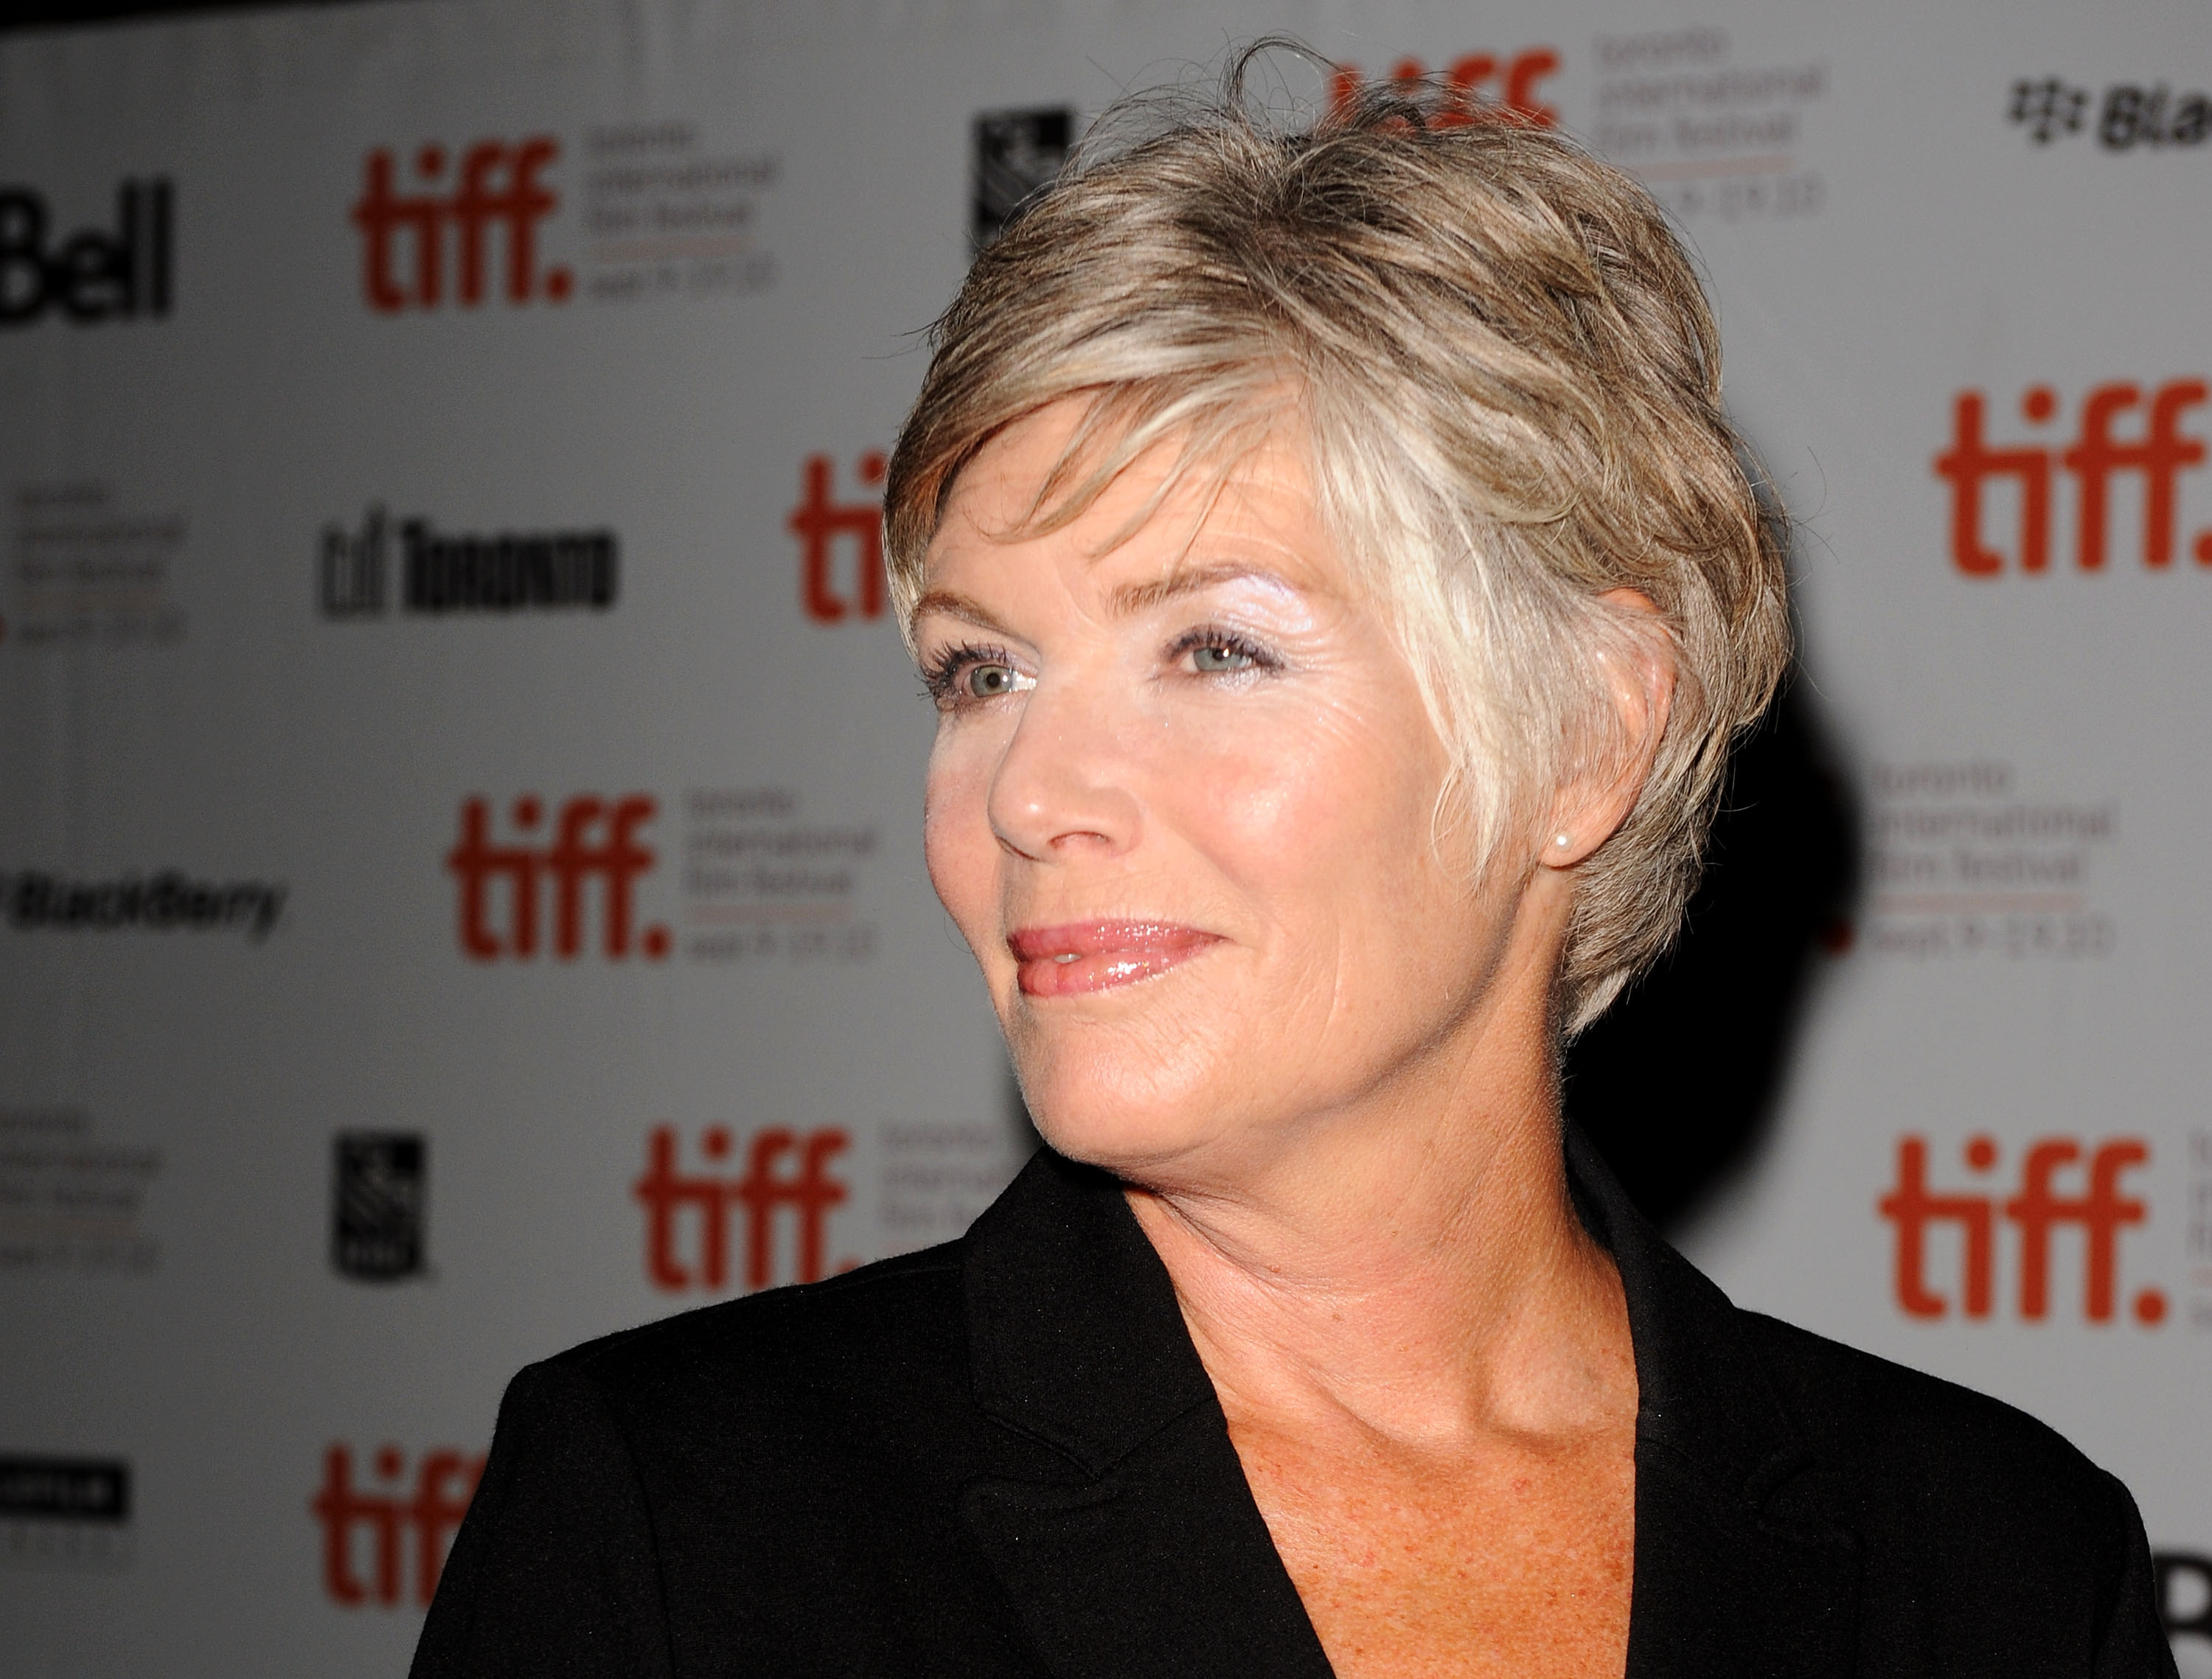 Kelly McGillis during the 35th Toronto International Film Festival on September 17, 2010, in Toronto, Canada. | Source: Getty Images